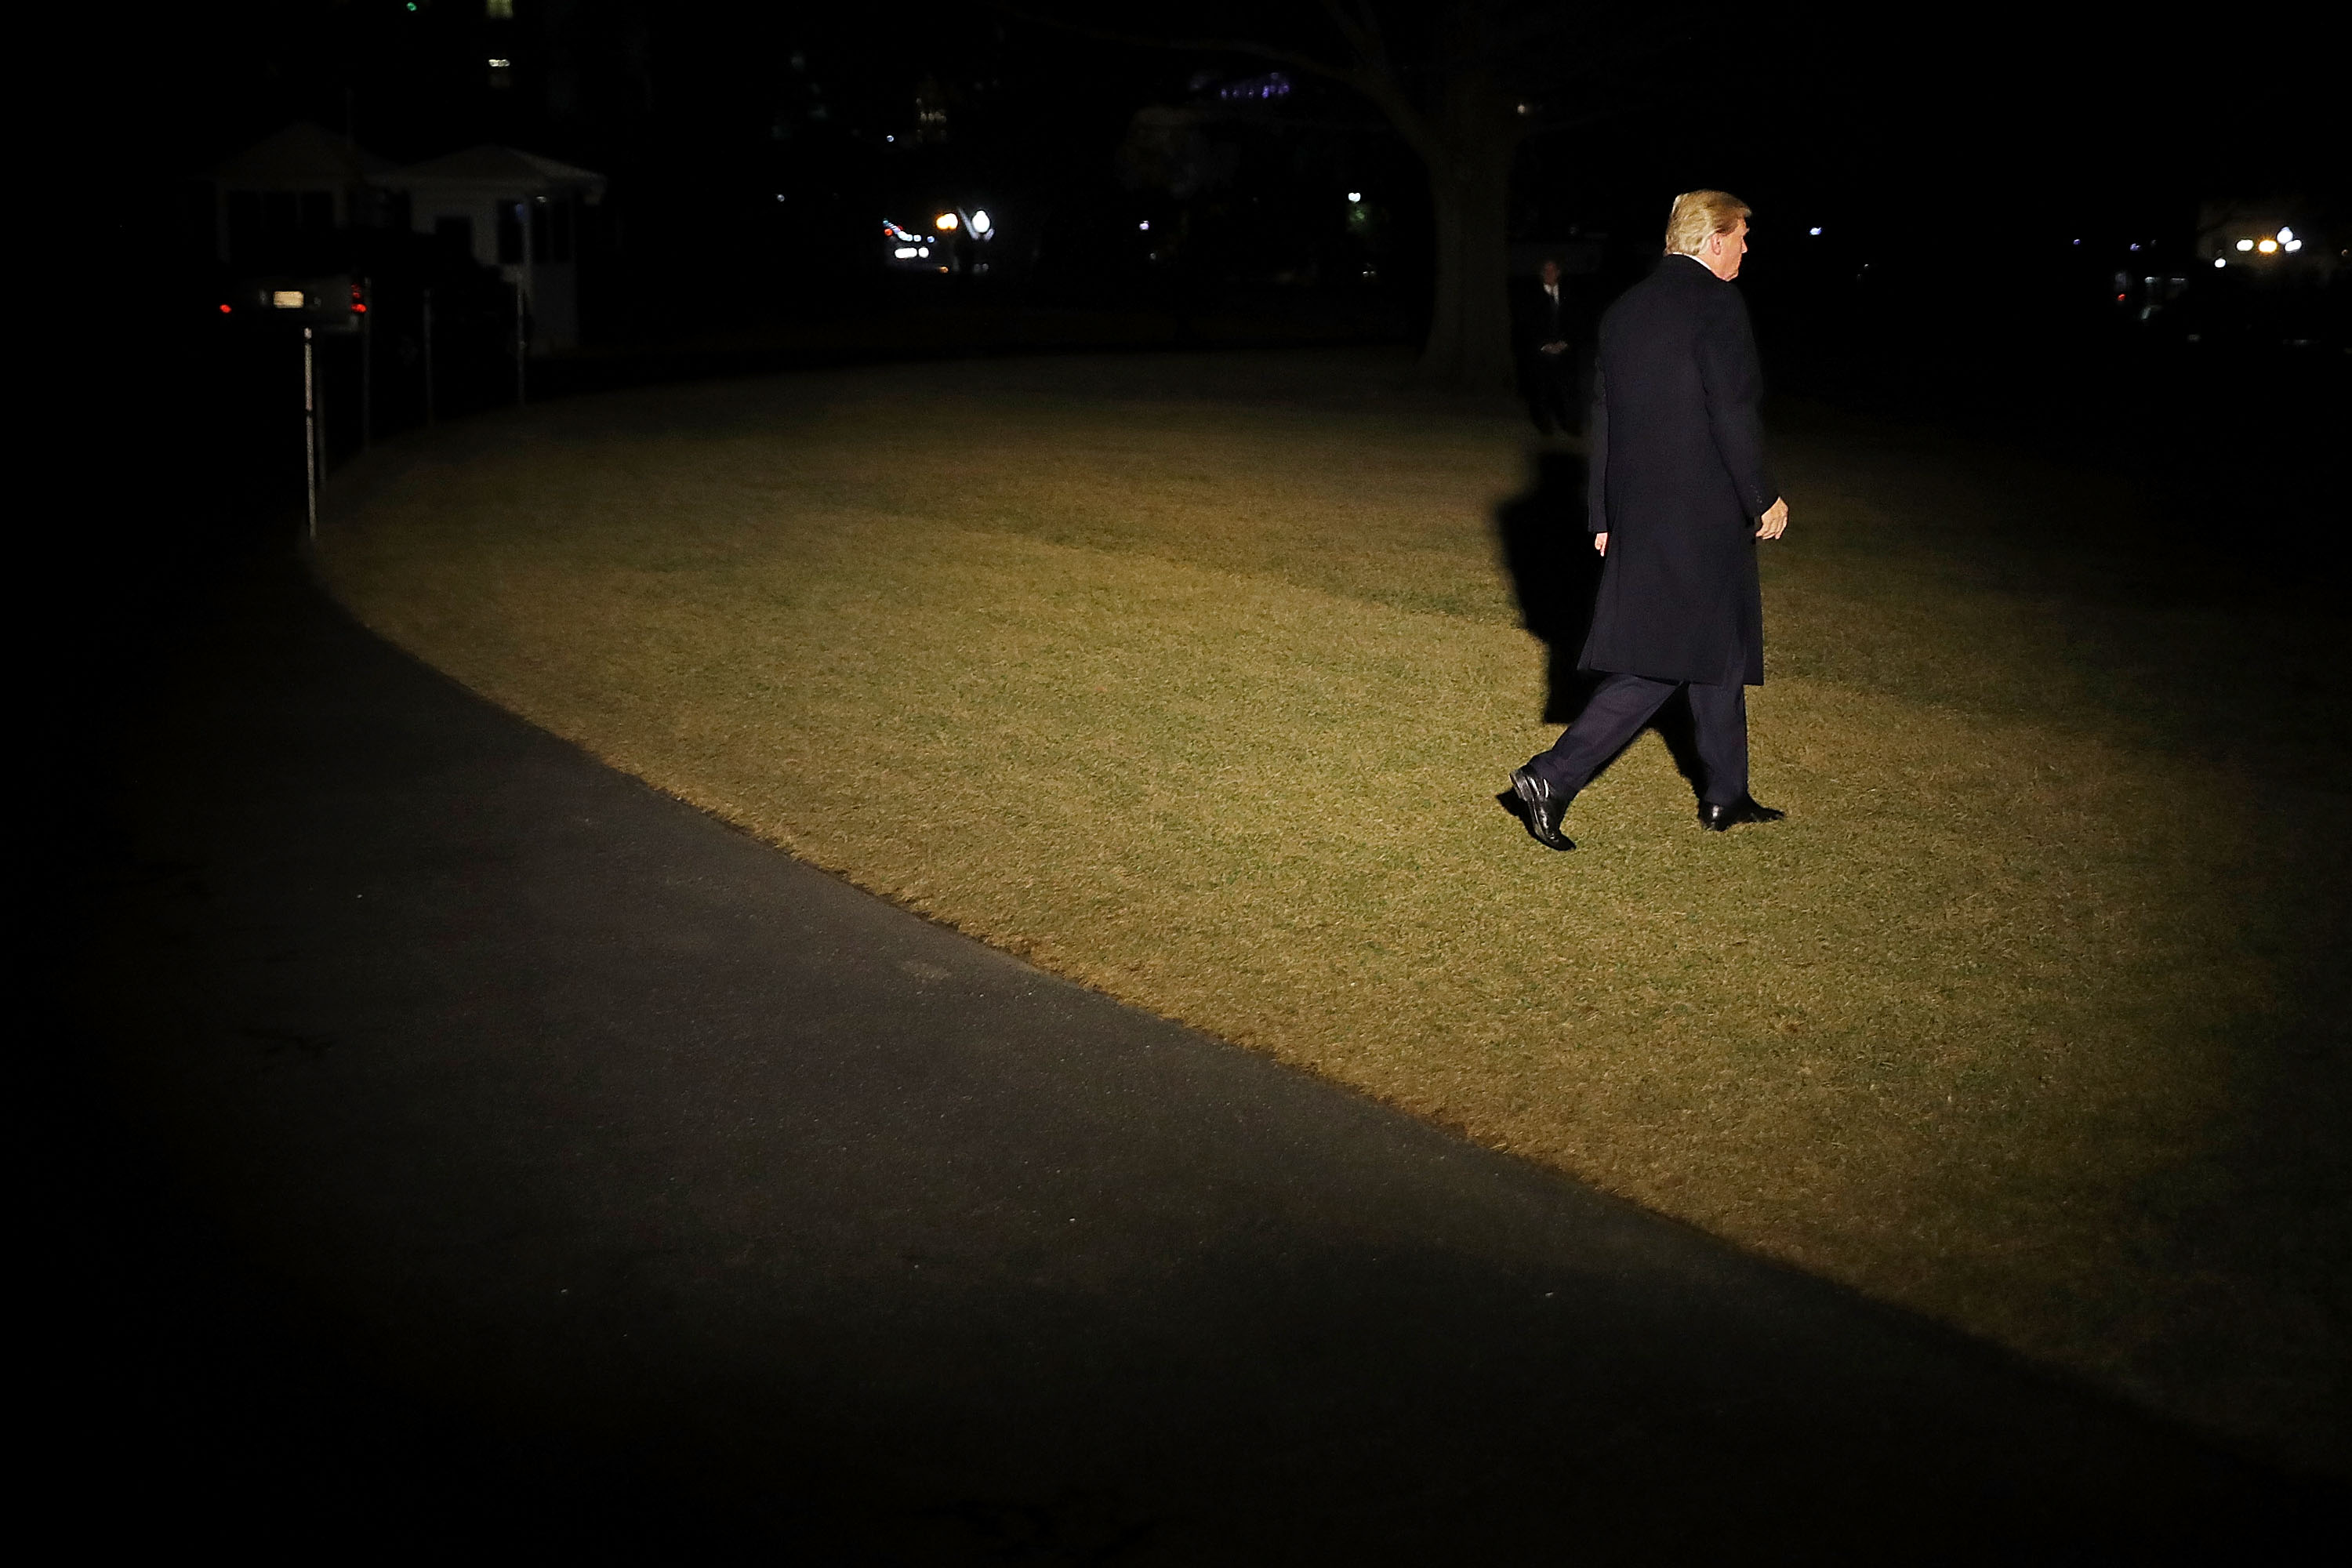 U.S. President Donald Trump leaves the White House for the World Economic Forum in Davos, Switzerland, Jan. 24, 2018 in Washington, D.C. (Chip Somodevilla&mdash;Getty Images)